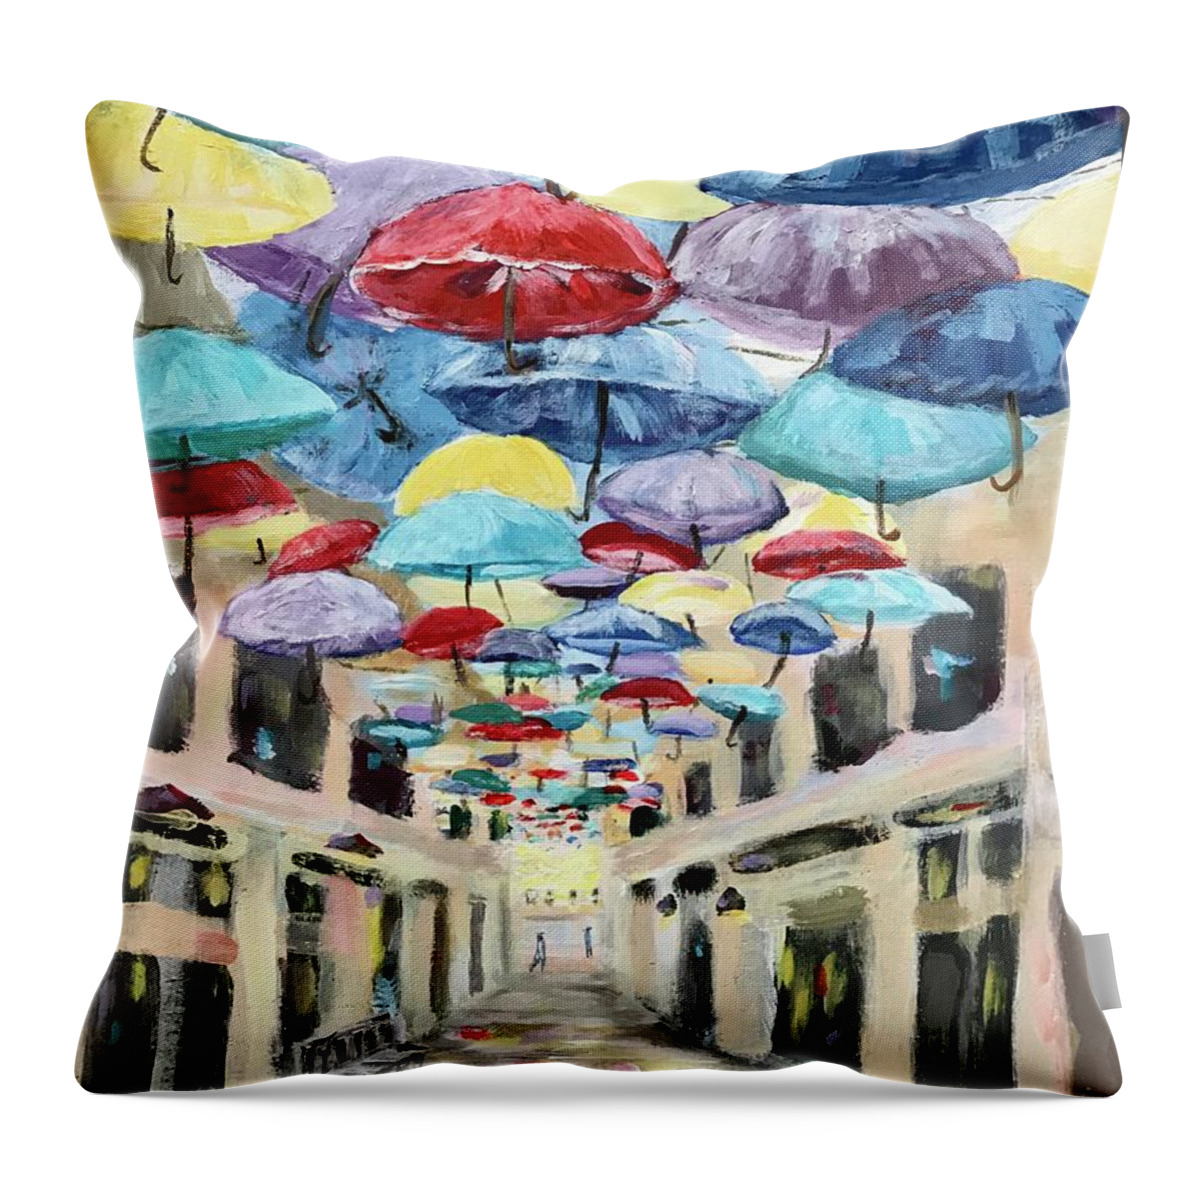 Parasols Throw Pillow featuring the painting Brolly Passage by Deborah Smith